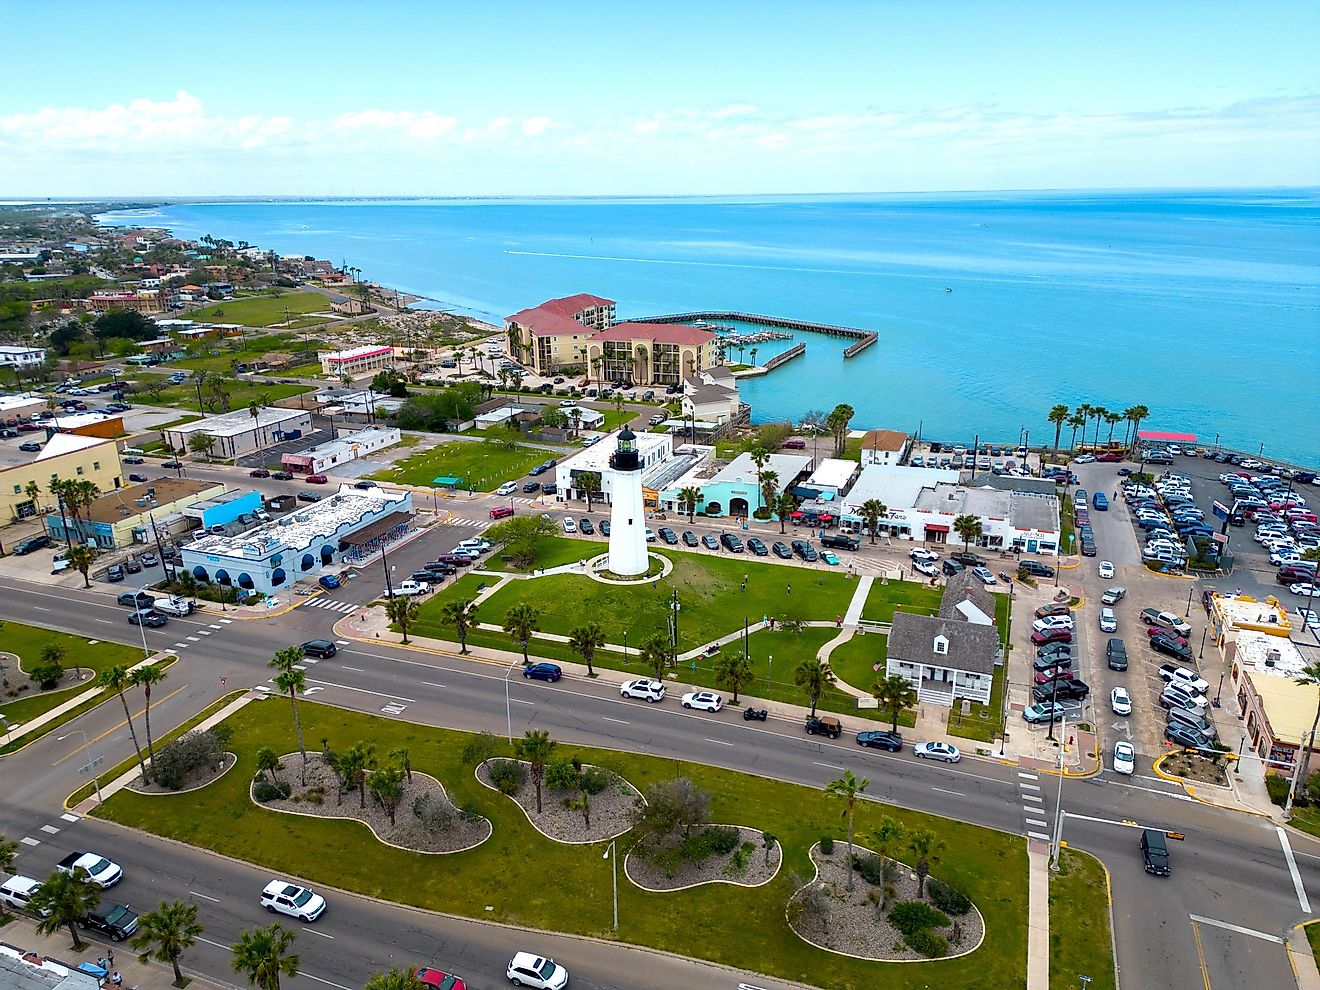 Aerial view of Port Isabel, Texas.